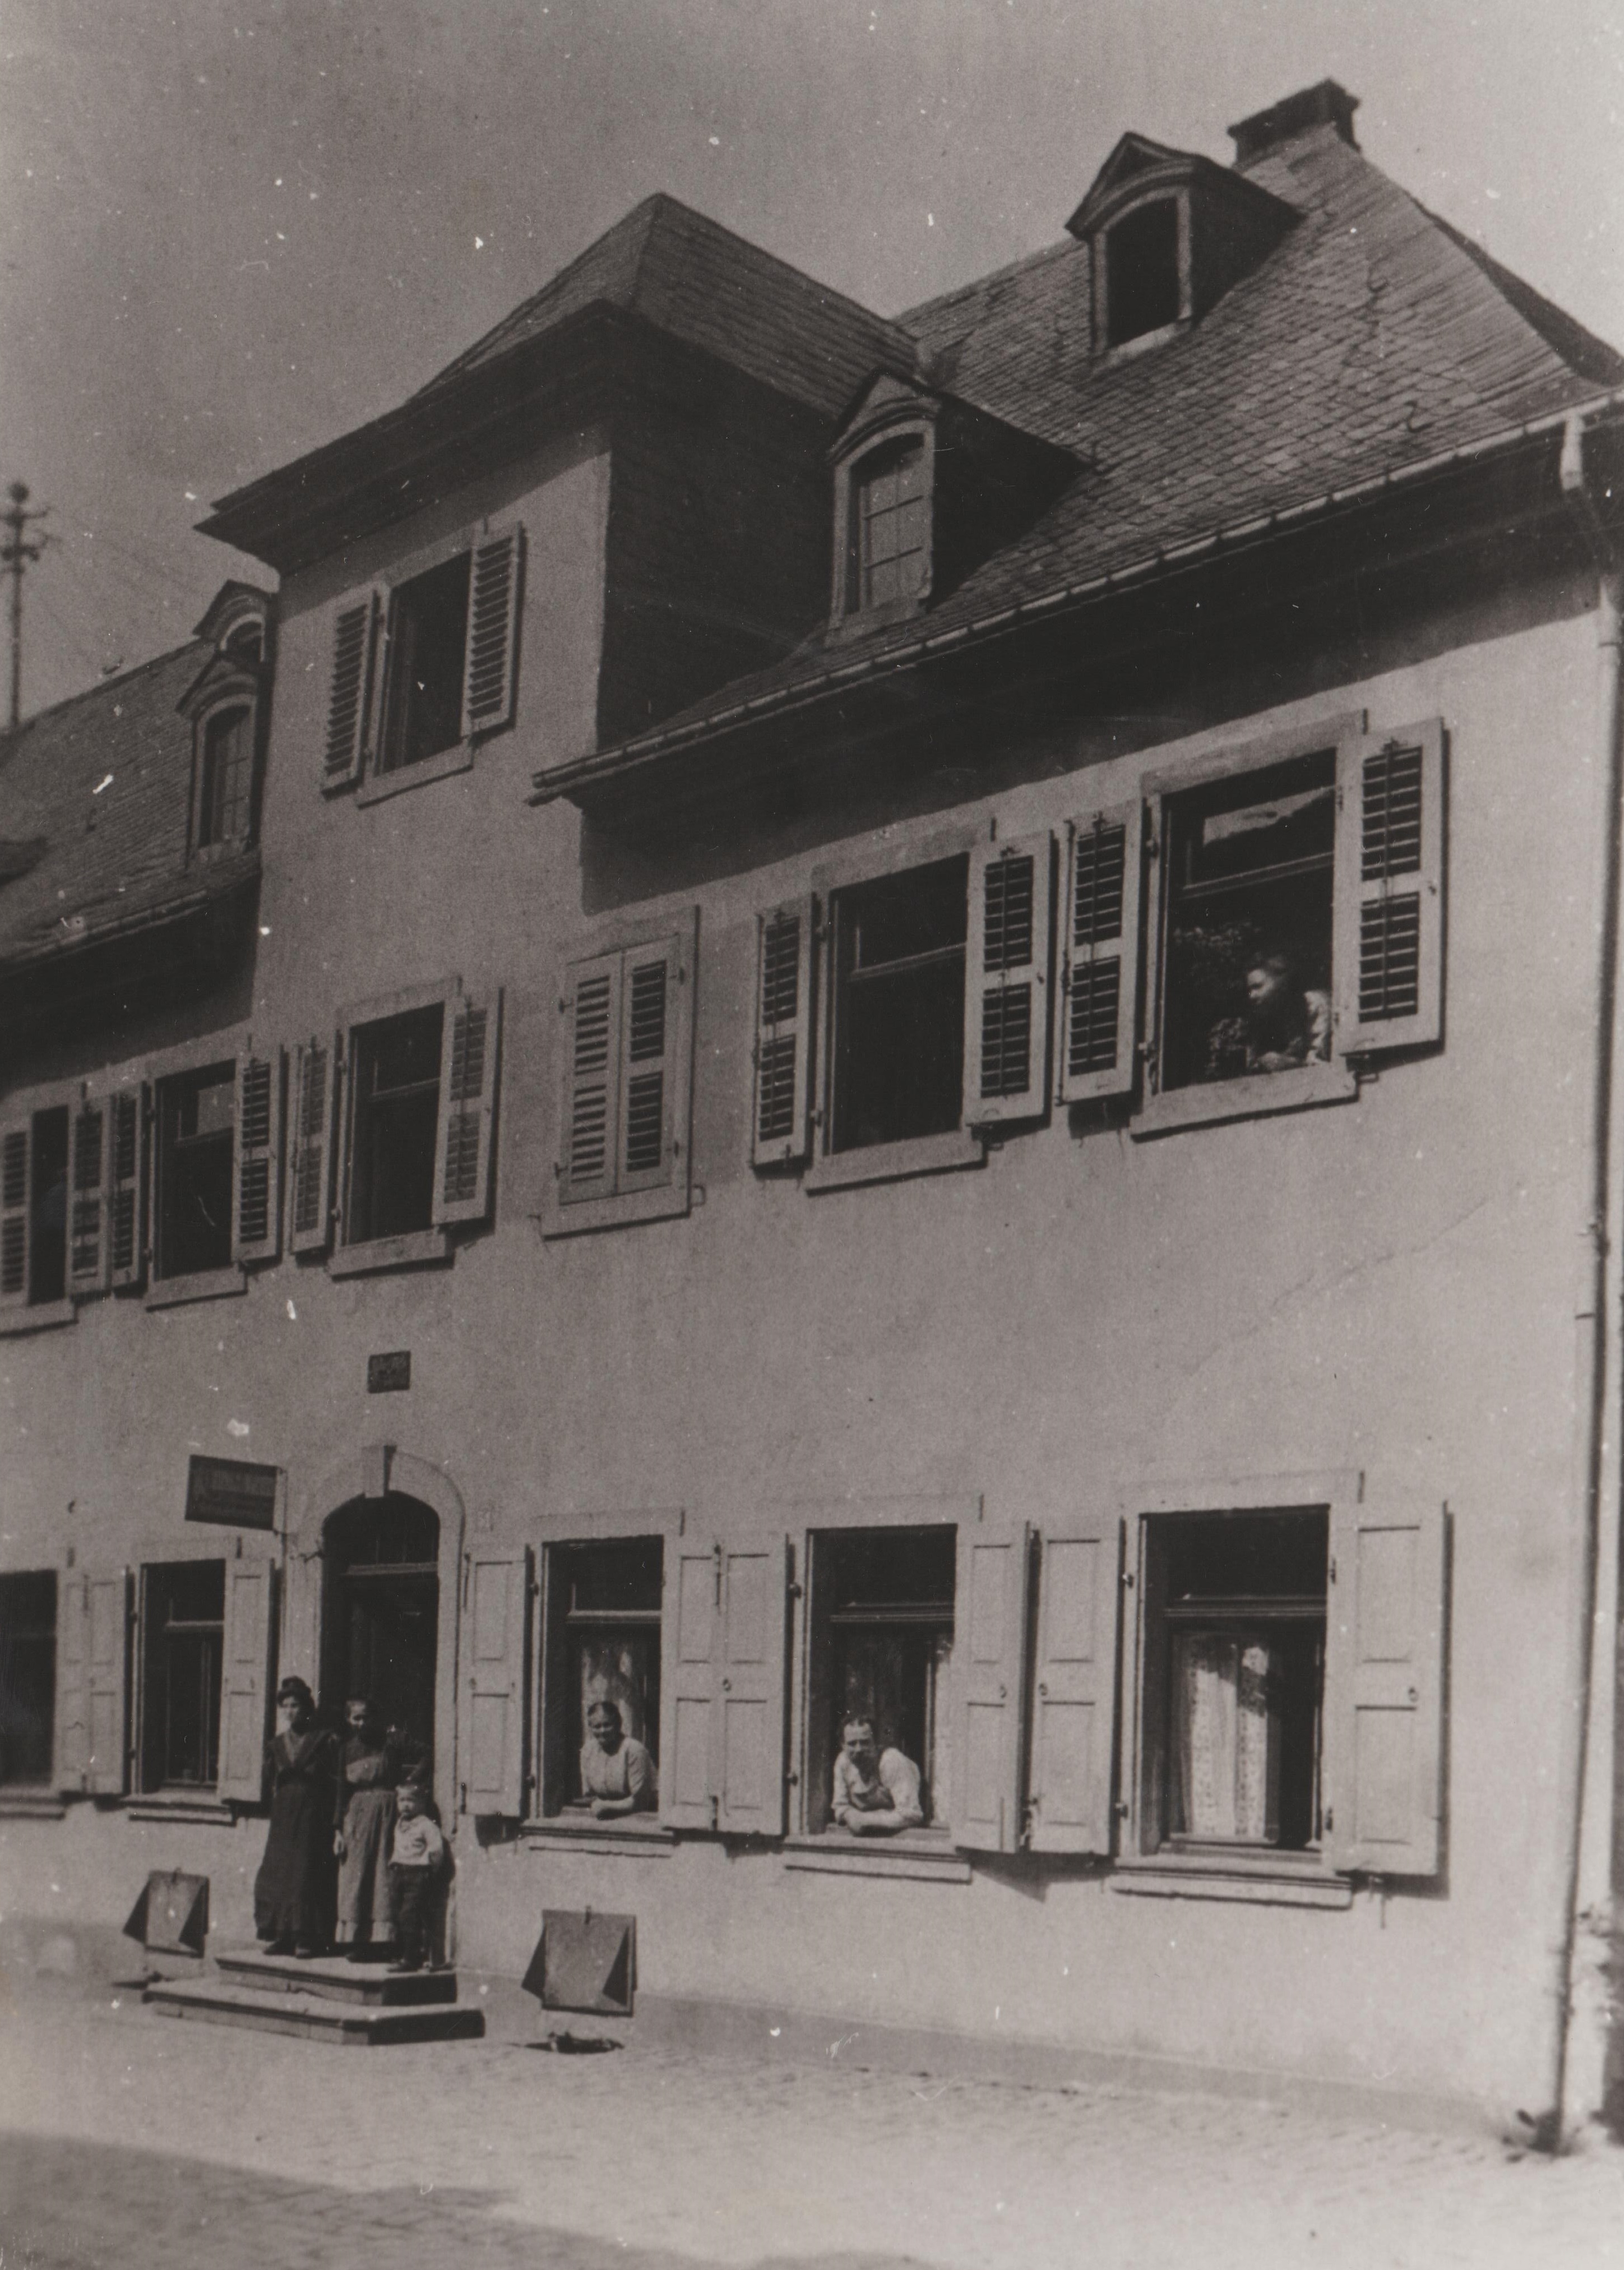 Obere Bachstrasse in Bendorf um 1910, Schuhhaus Fries (REM CC BY-NC-SA)